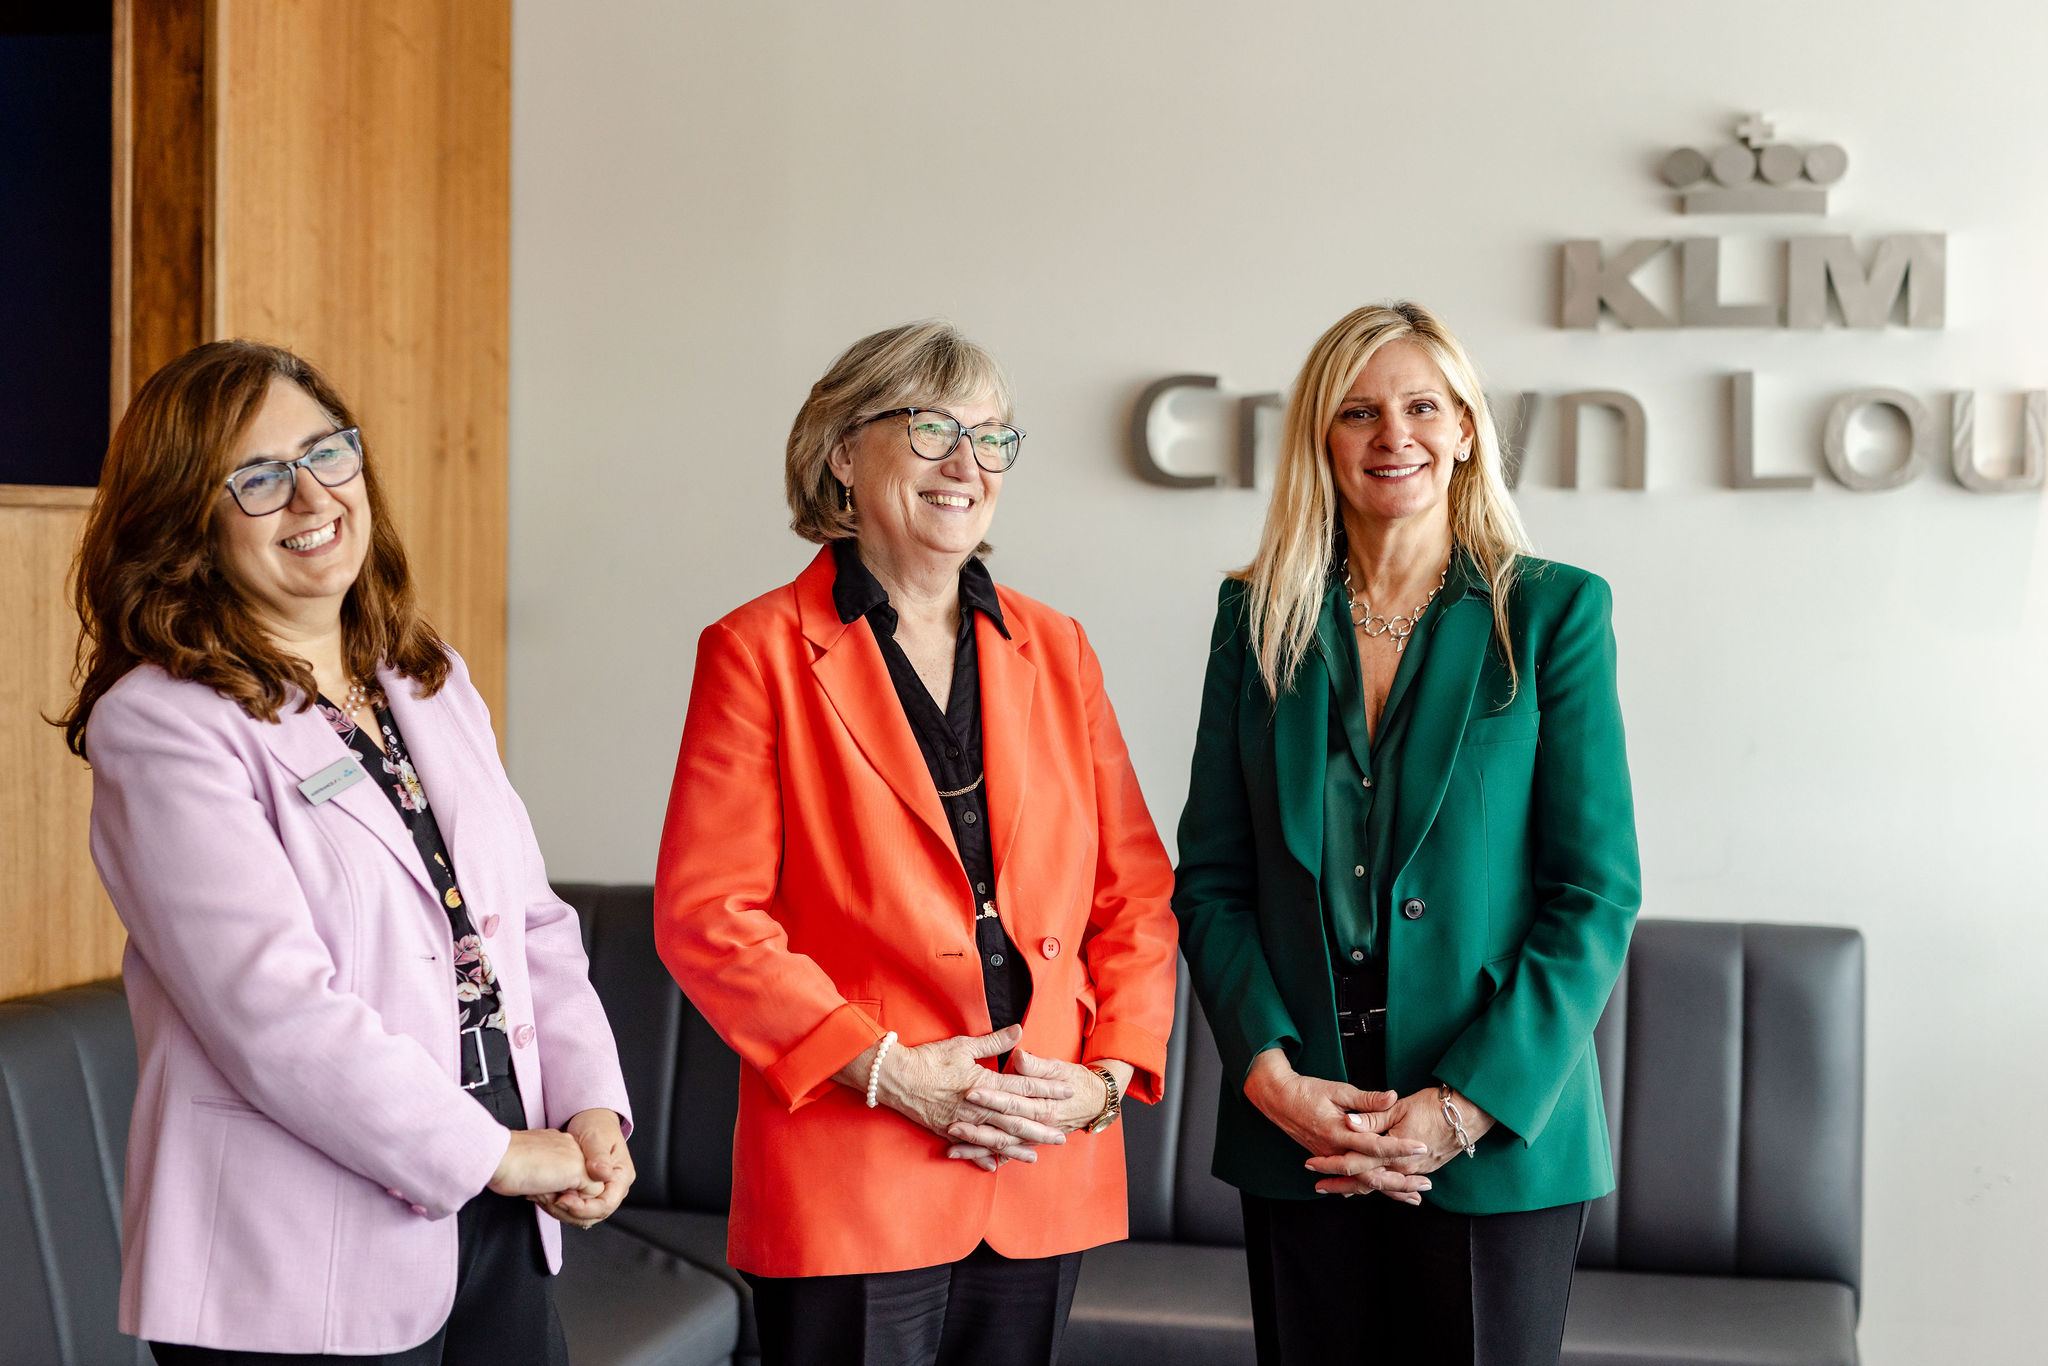 Three women standing in front of a sign that says klm crown lounge.